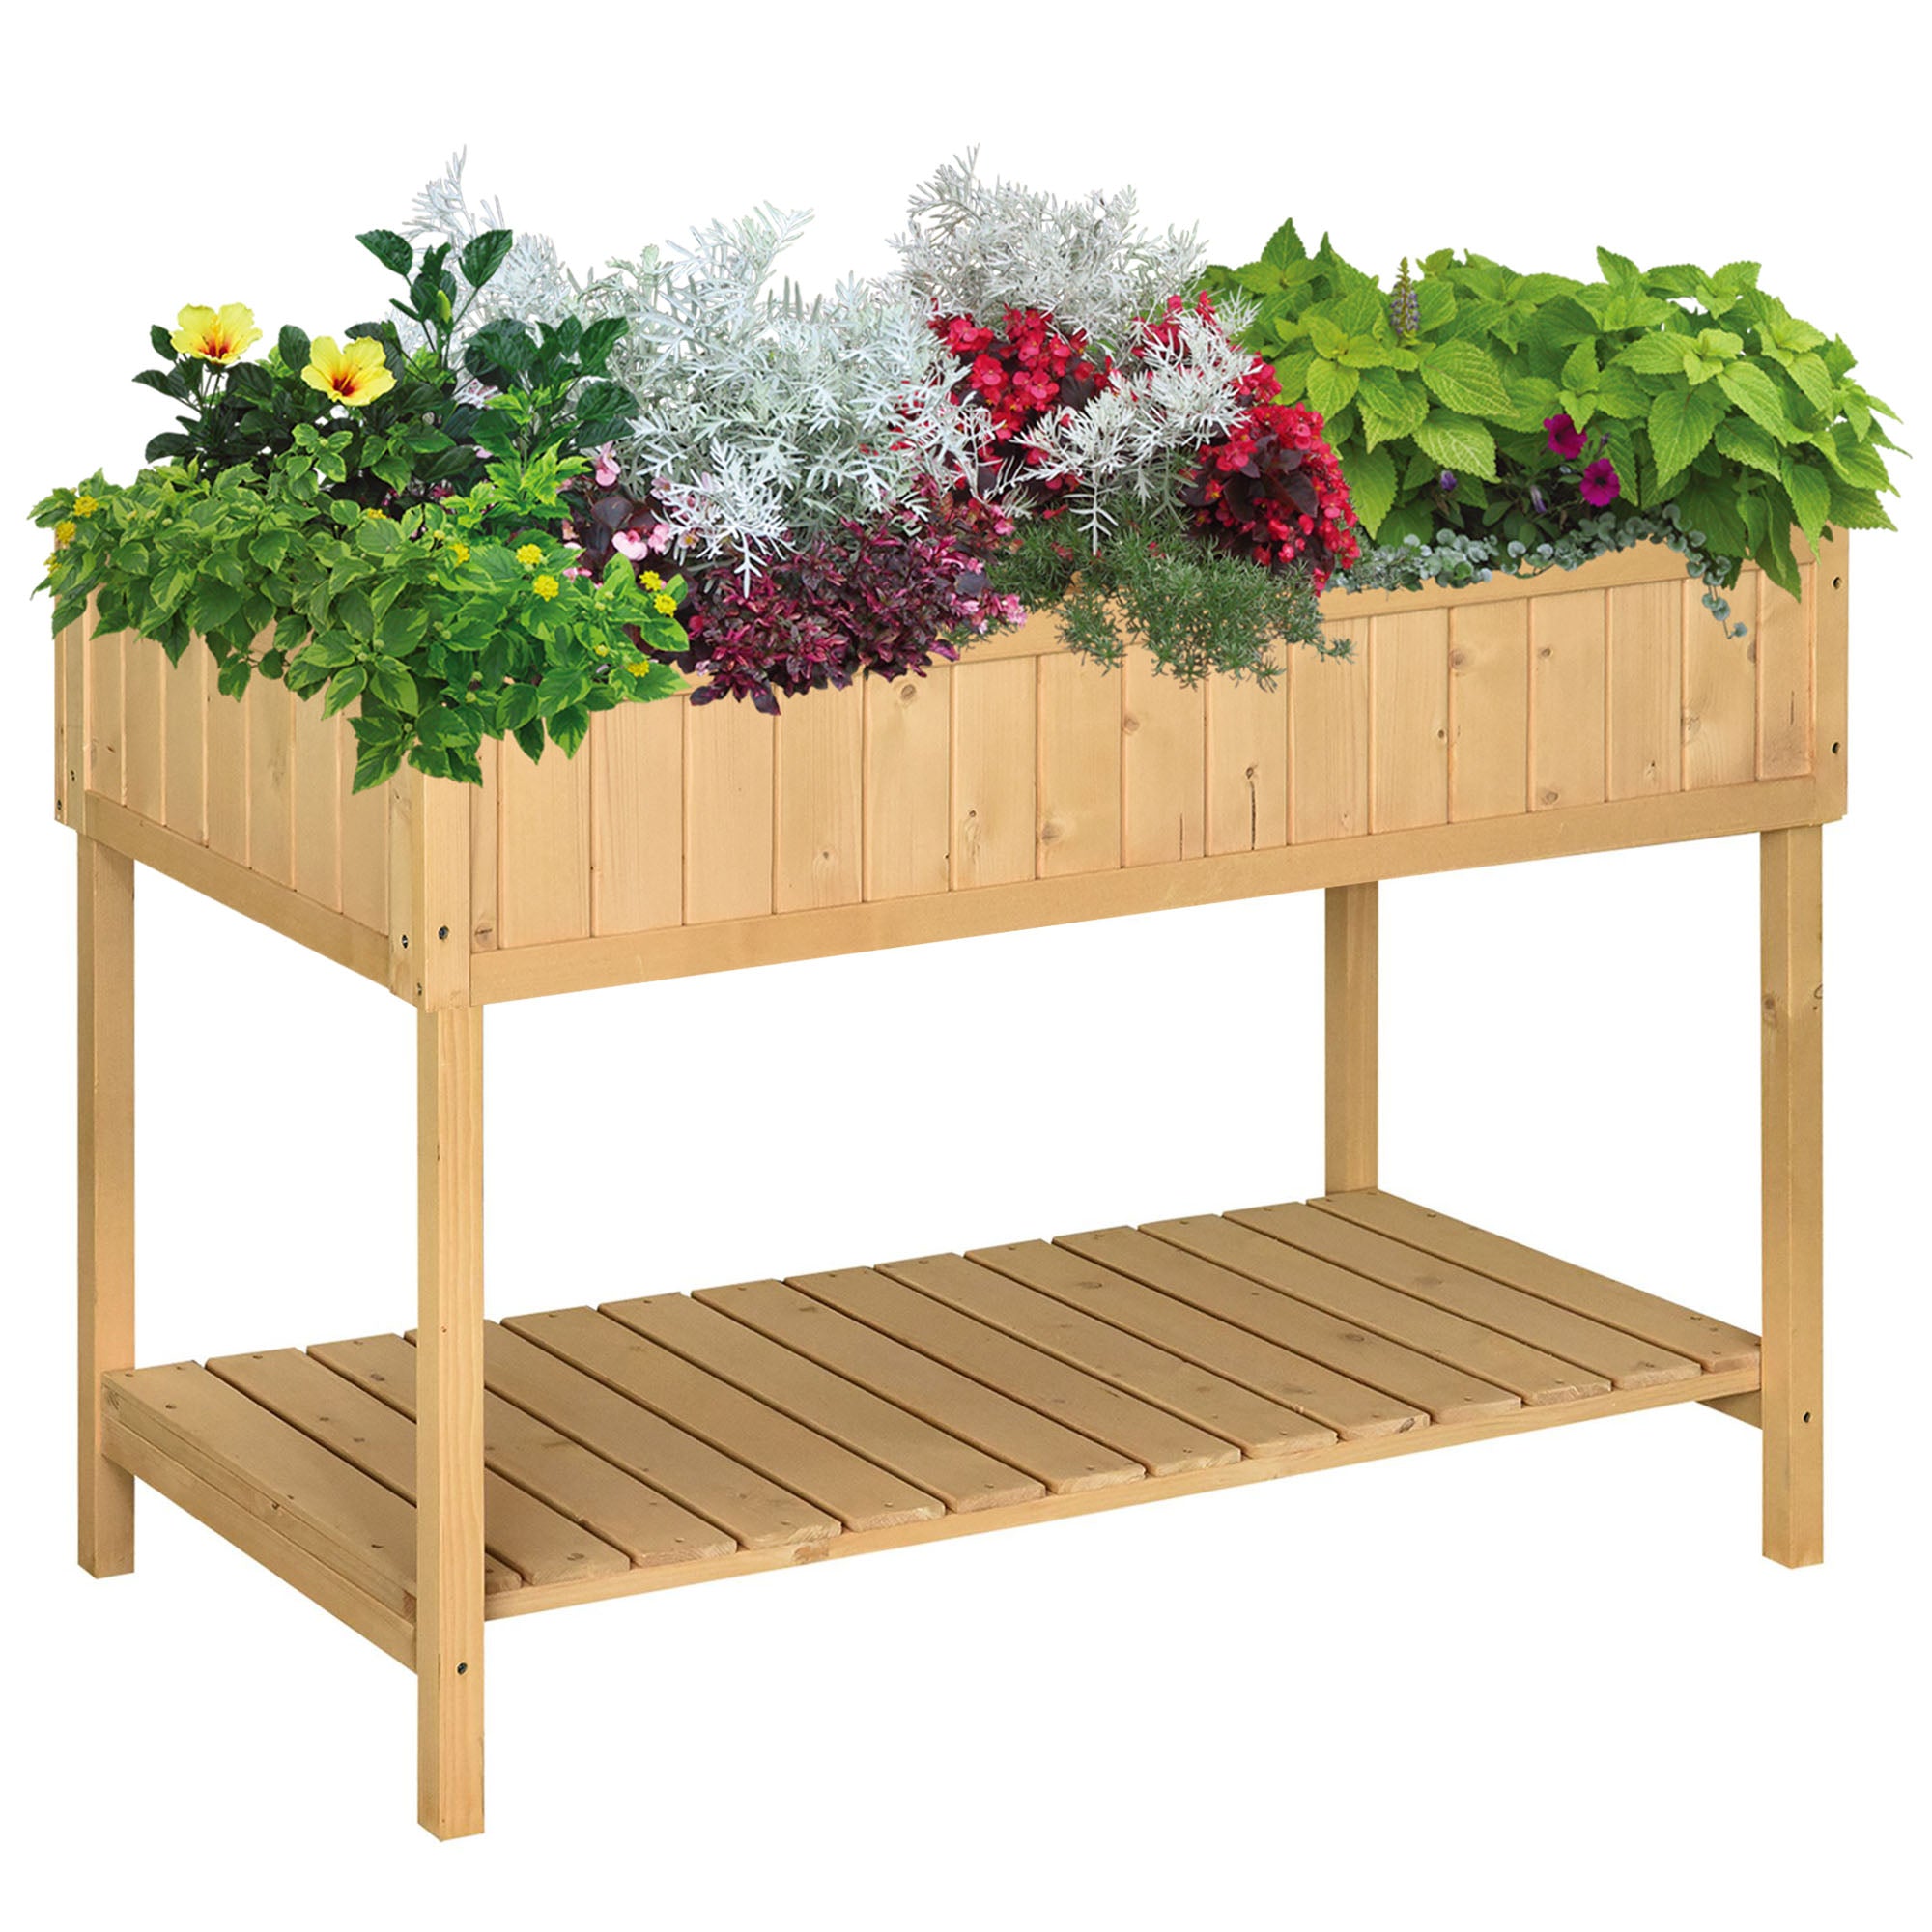 Outsunny Wooden Herb Planter Stand 8 Cubes Bottom Shelf Raised Bed Natural  | TJ Hughes